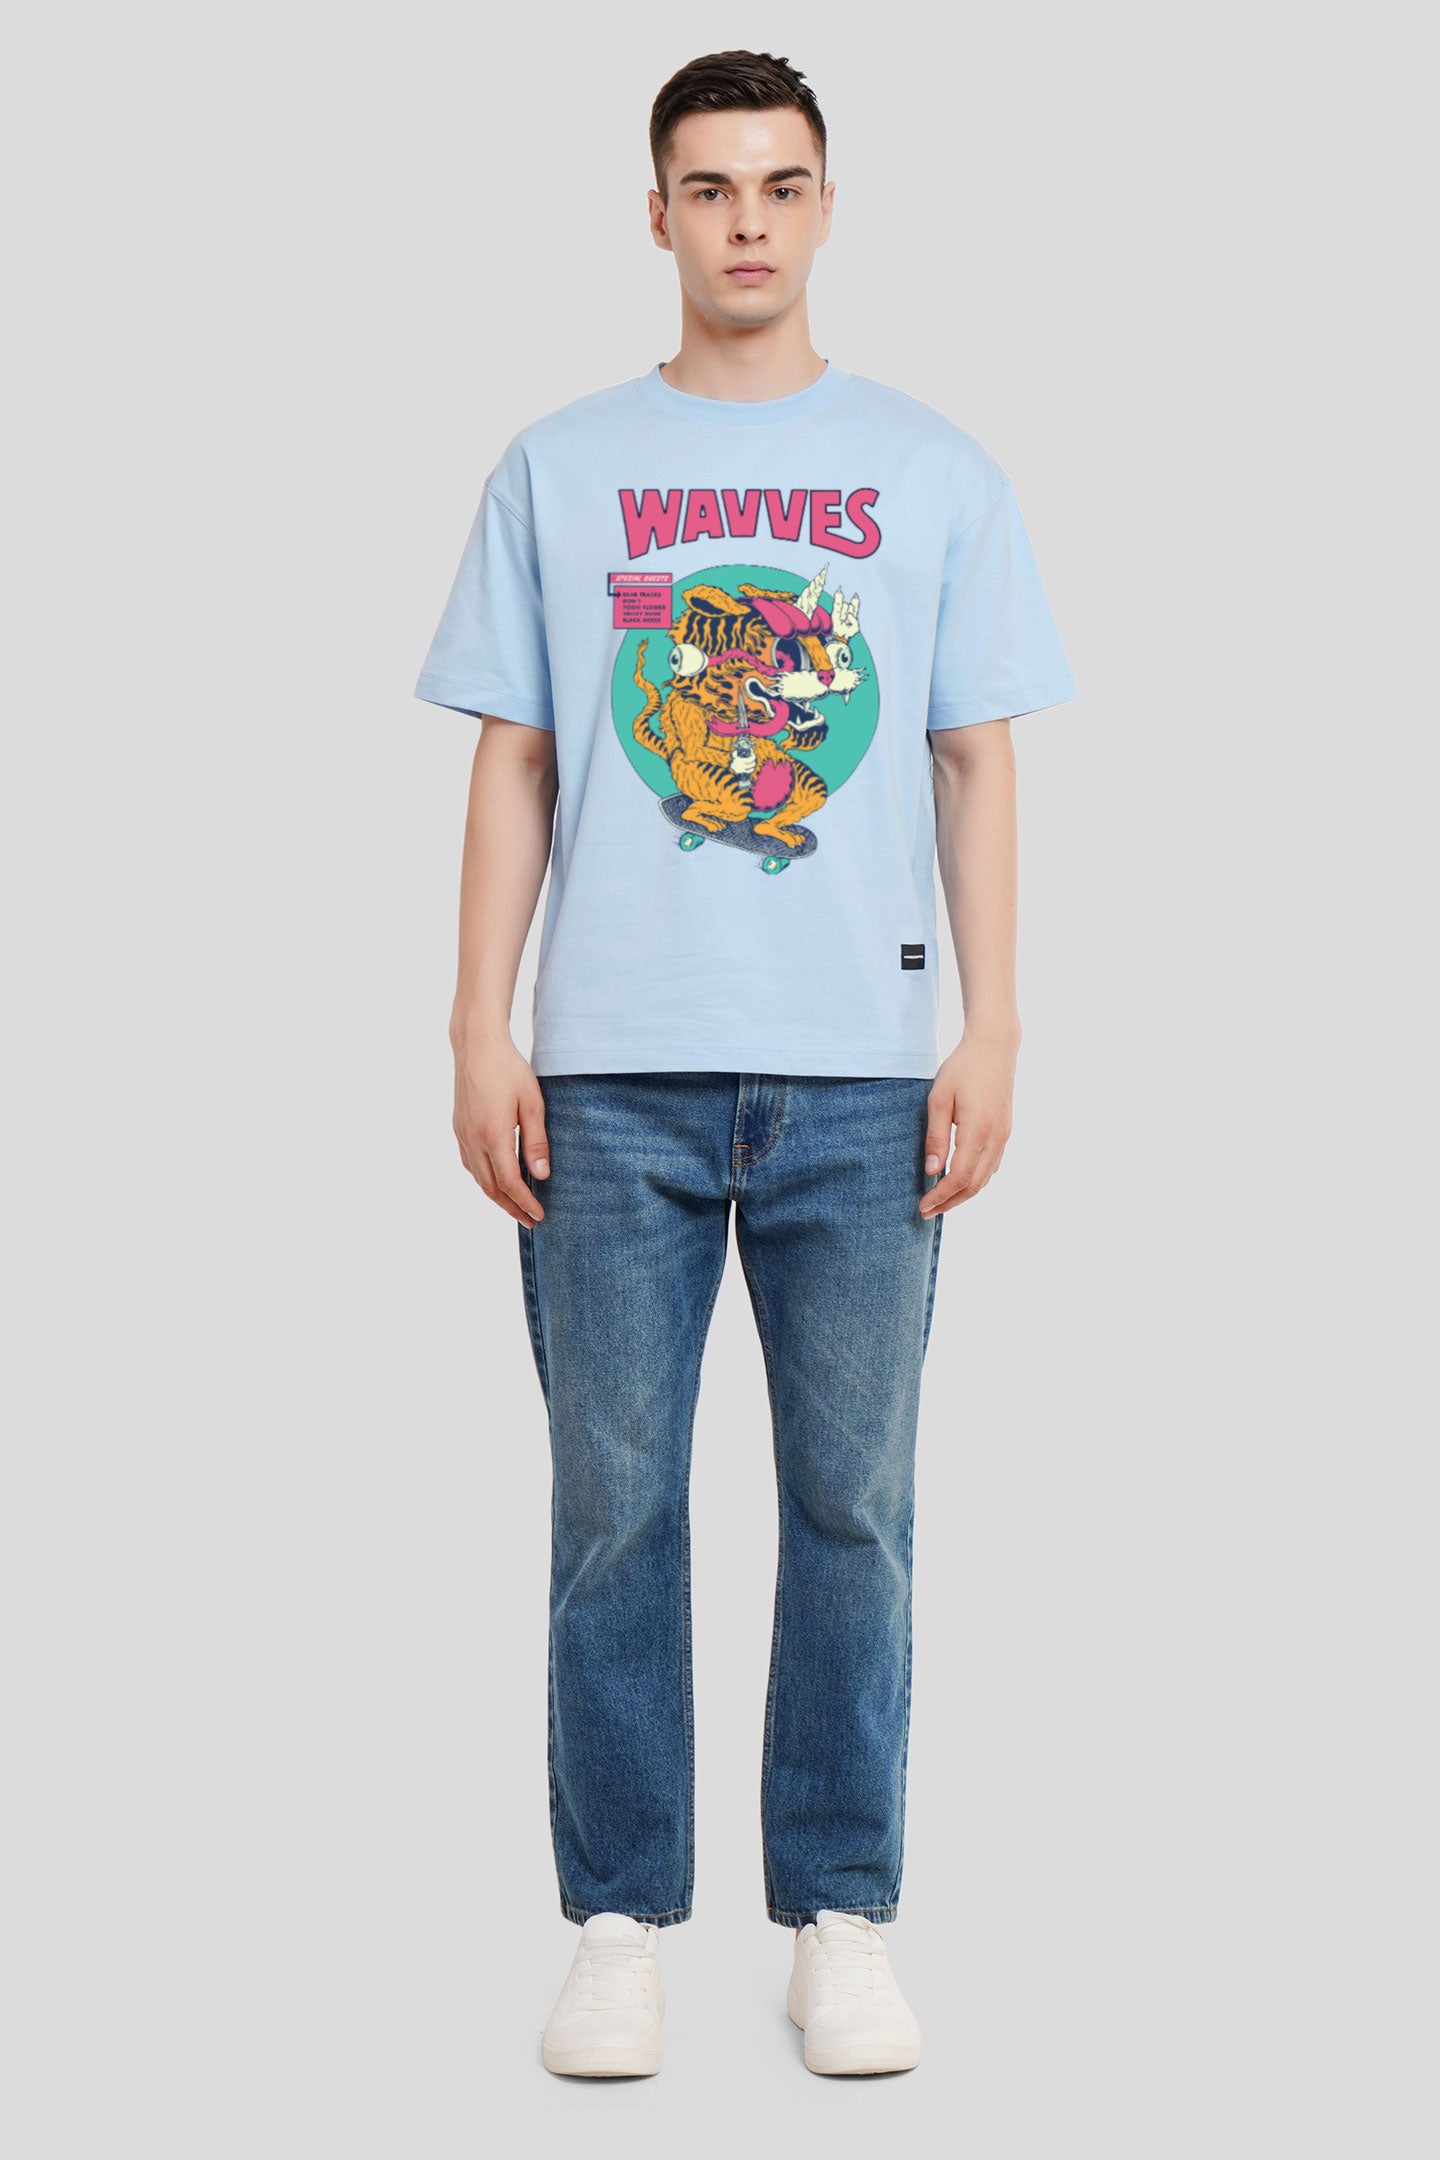 Wavves Powder Blue Printed T Shirt Men Oversized Fit With Front Design Pic 2